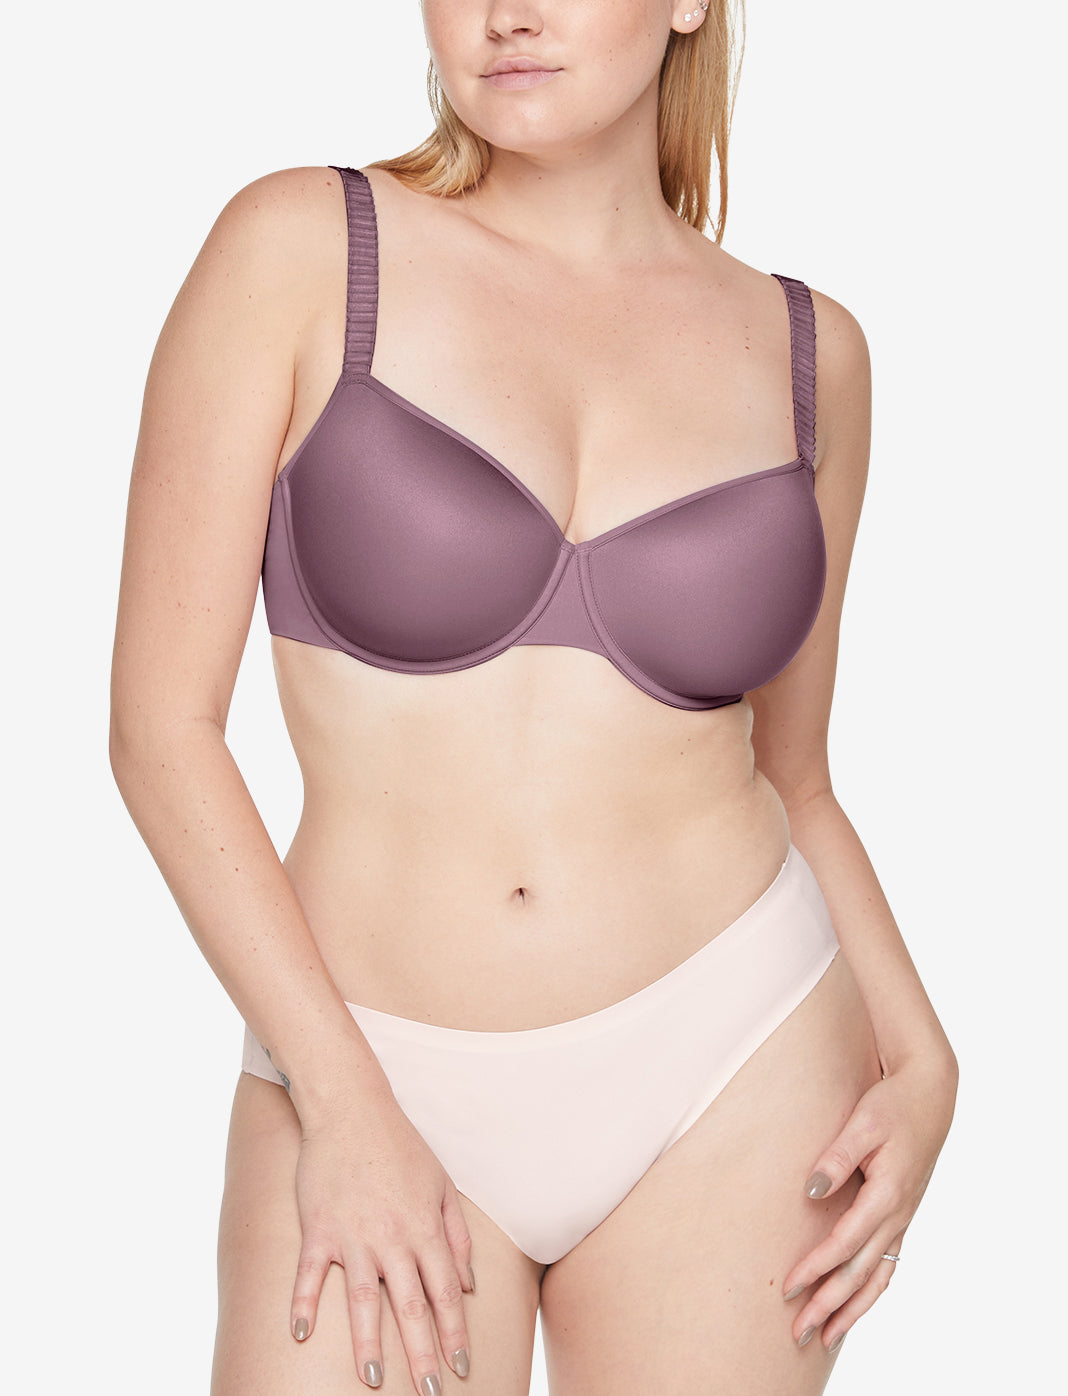 ThirdLove - The 24/7™ Classic Contour Plunge Bra now comes in Rose Dust, a  soft pink that can pass as a neutral. ⠀⠀⠀⠀⠀⠀⠀⠀⠀ #BrasForEveryBody